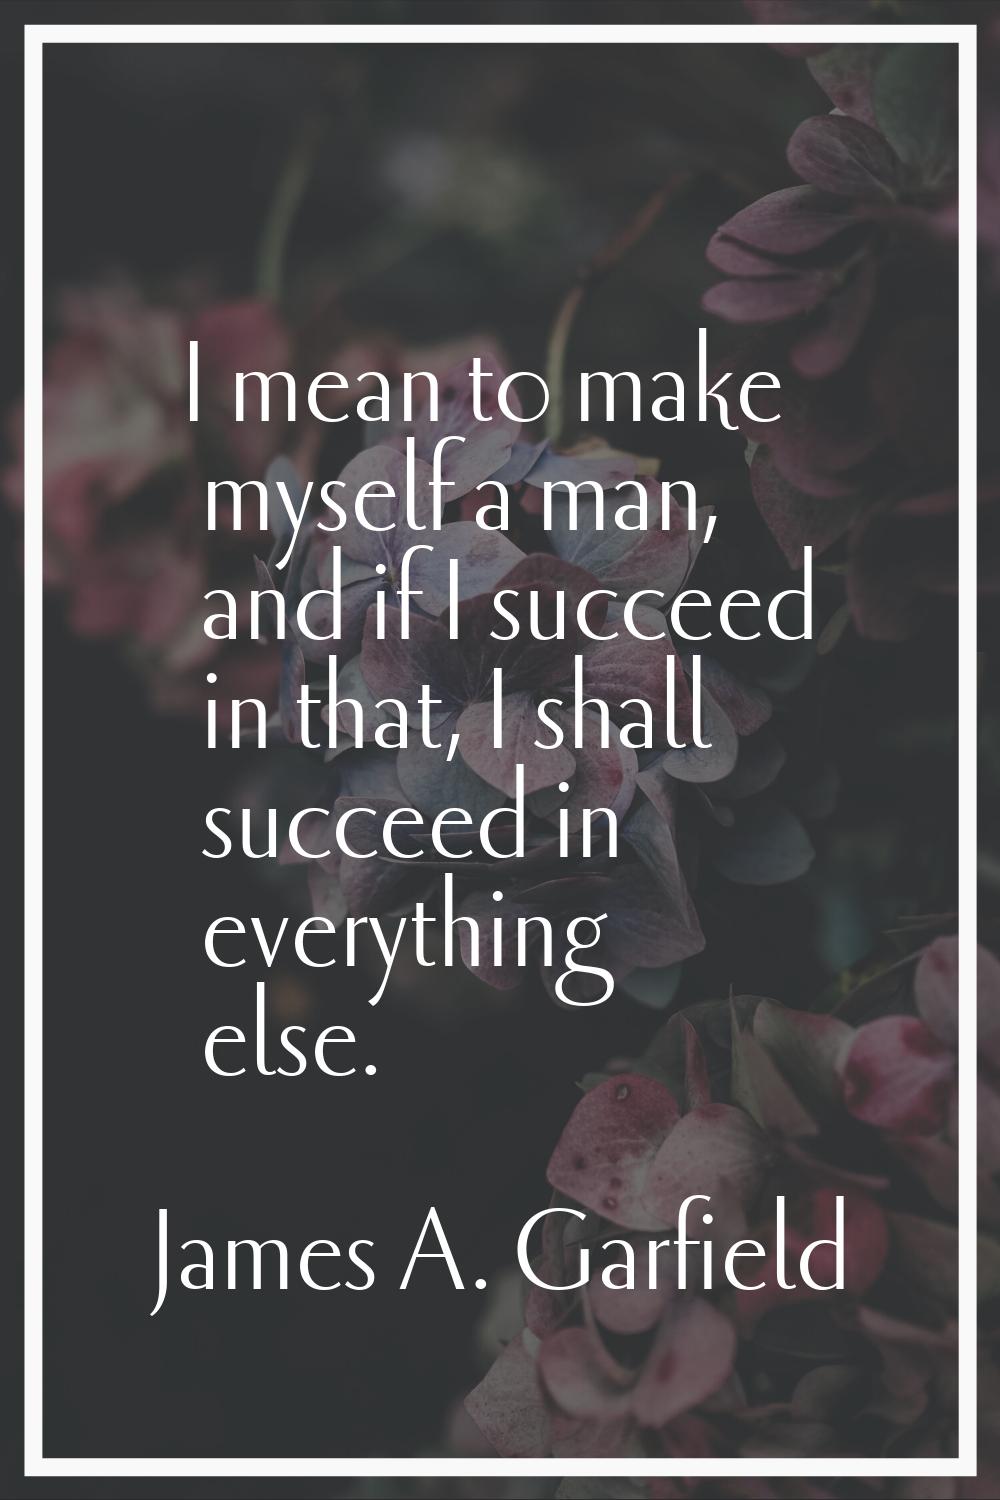 I mean to make myself a man, and if I succeed in that, I shall succeed in everything else.